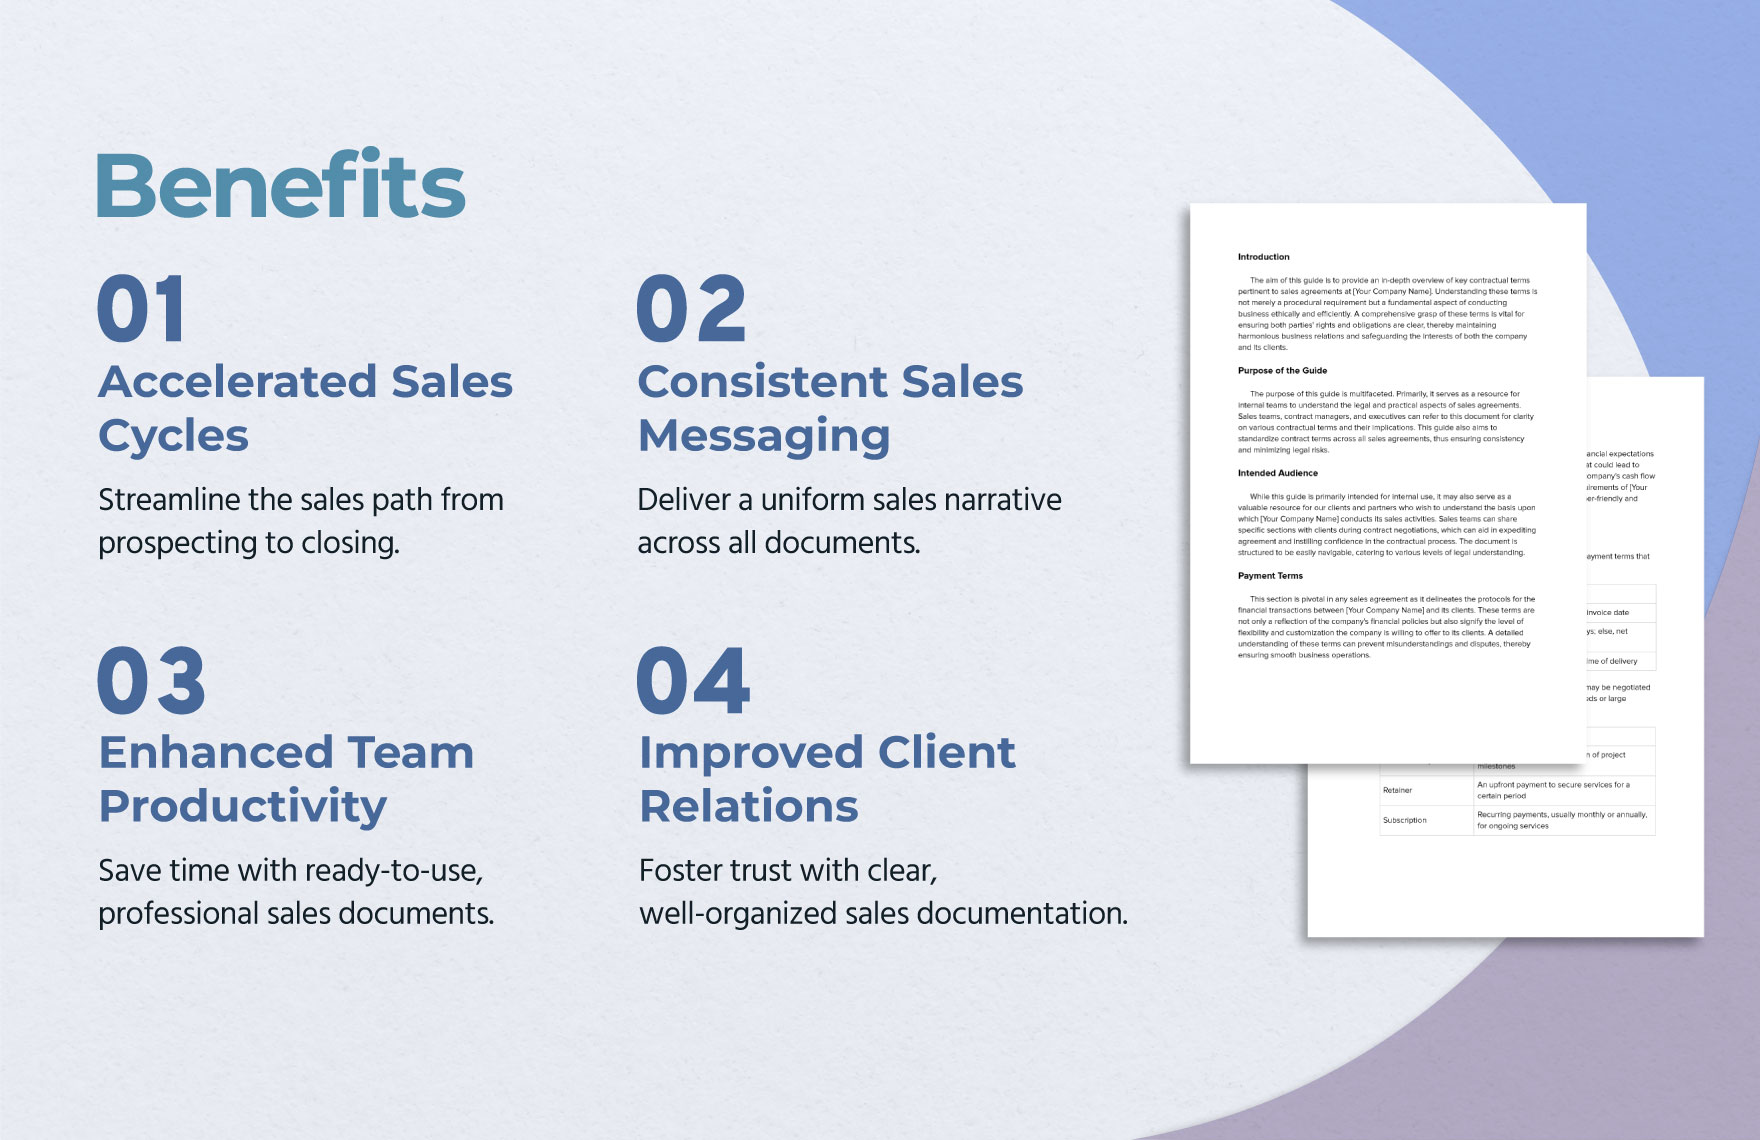 Sales Guide on Key Contractual Terms Template